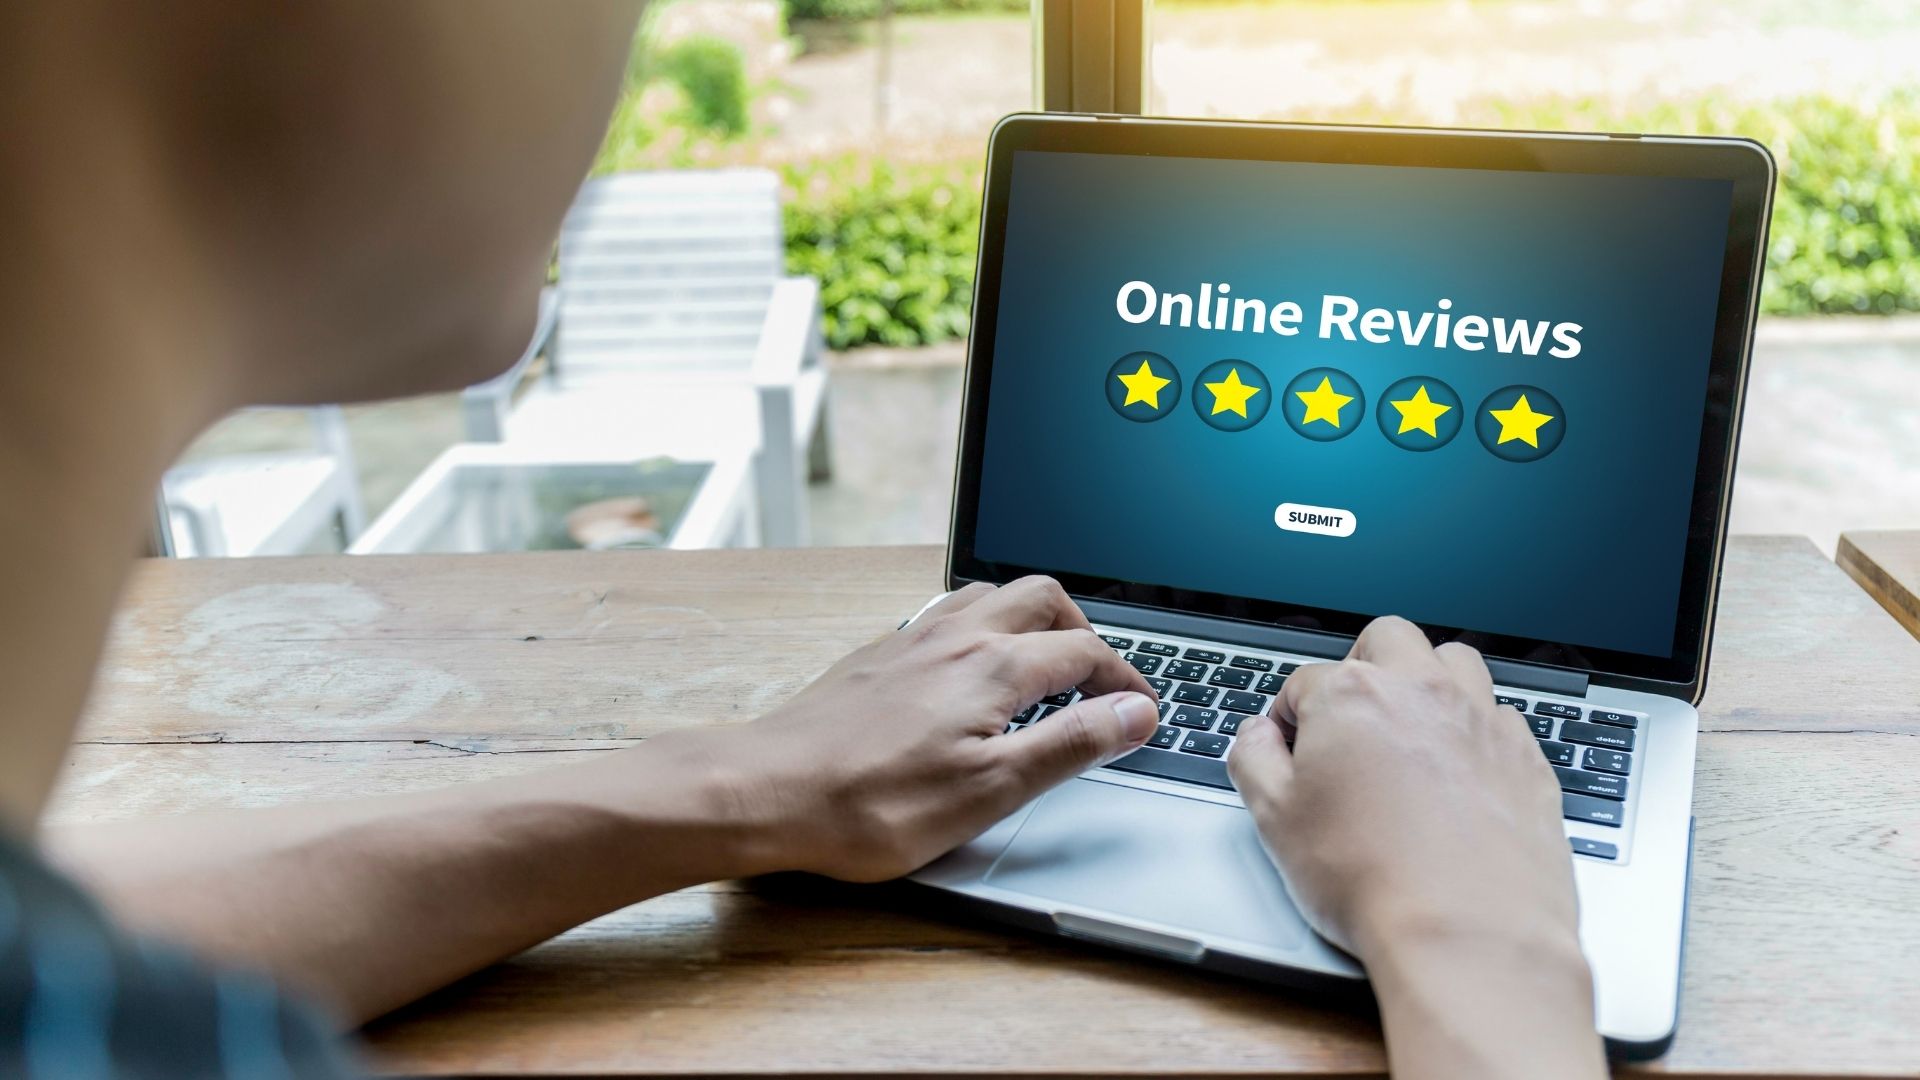 Featured image for “How to Ensure Your Online Customer Reviews Are Glowing”